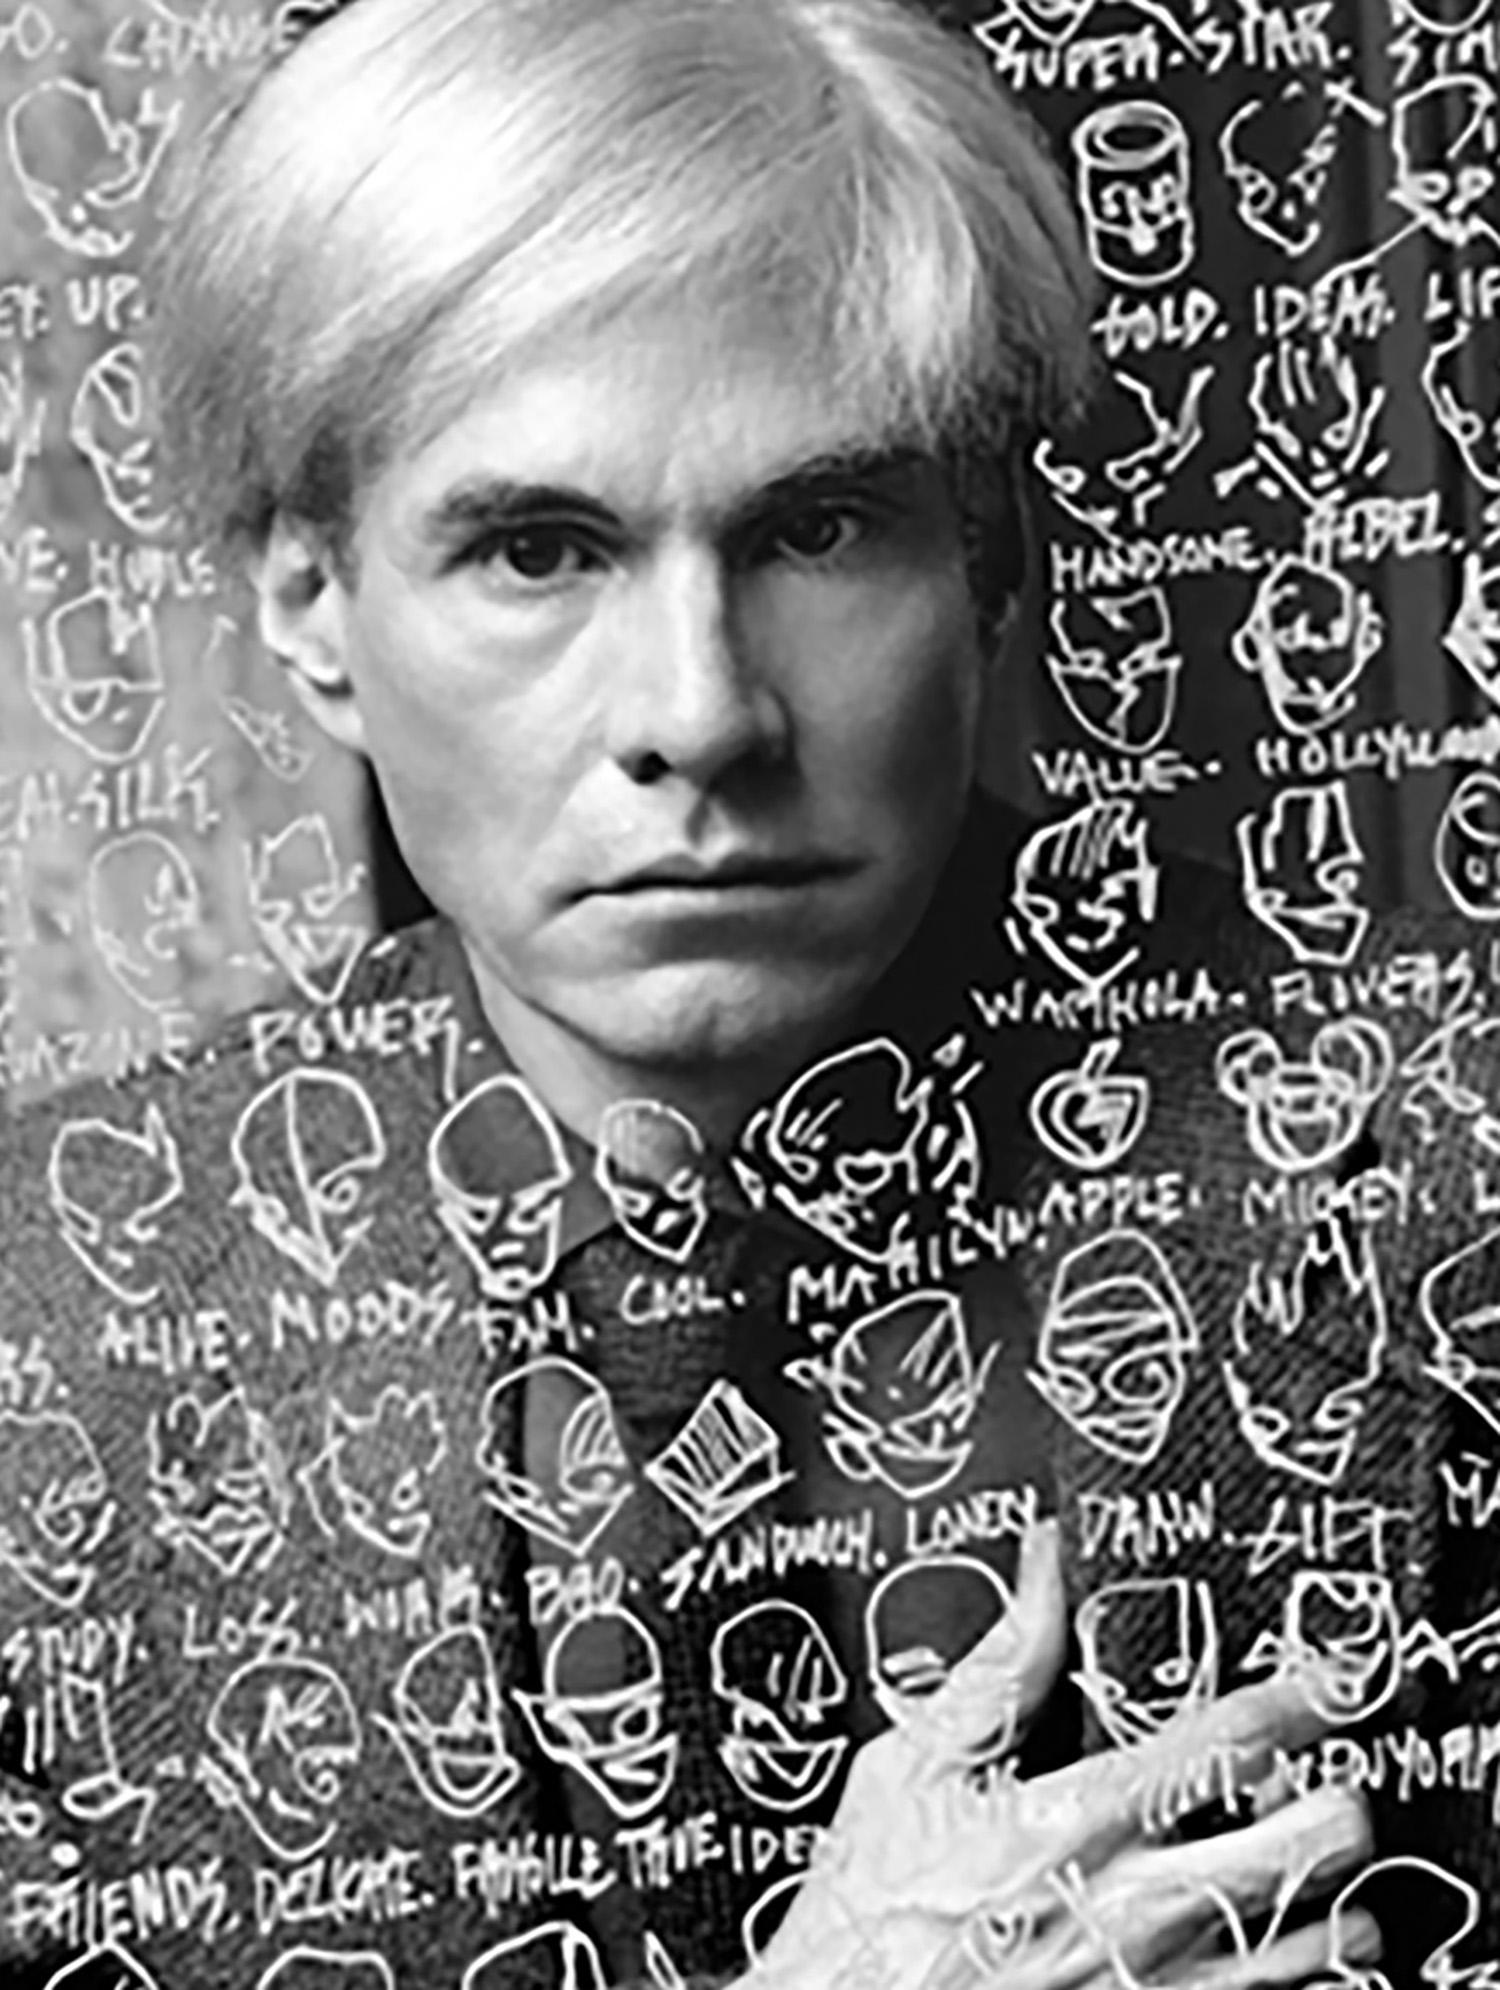 The Exotic Life of Andy Warhol, 2014 - Photograph by Karen Bystedt and Gregory Siff